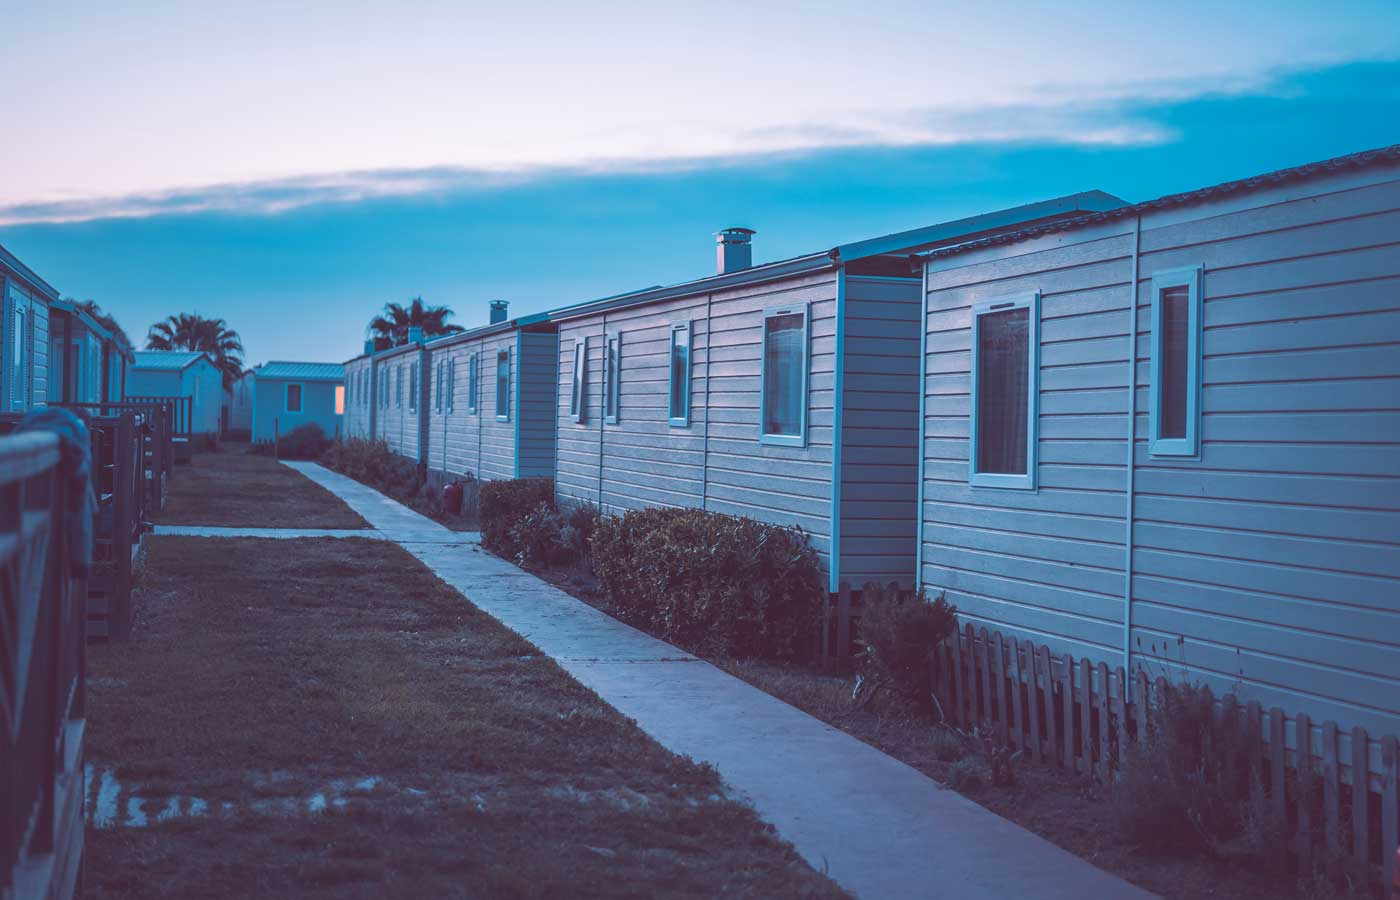 Shows a selection of Park Homes at sunset